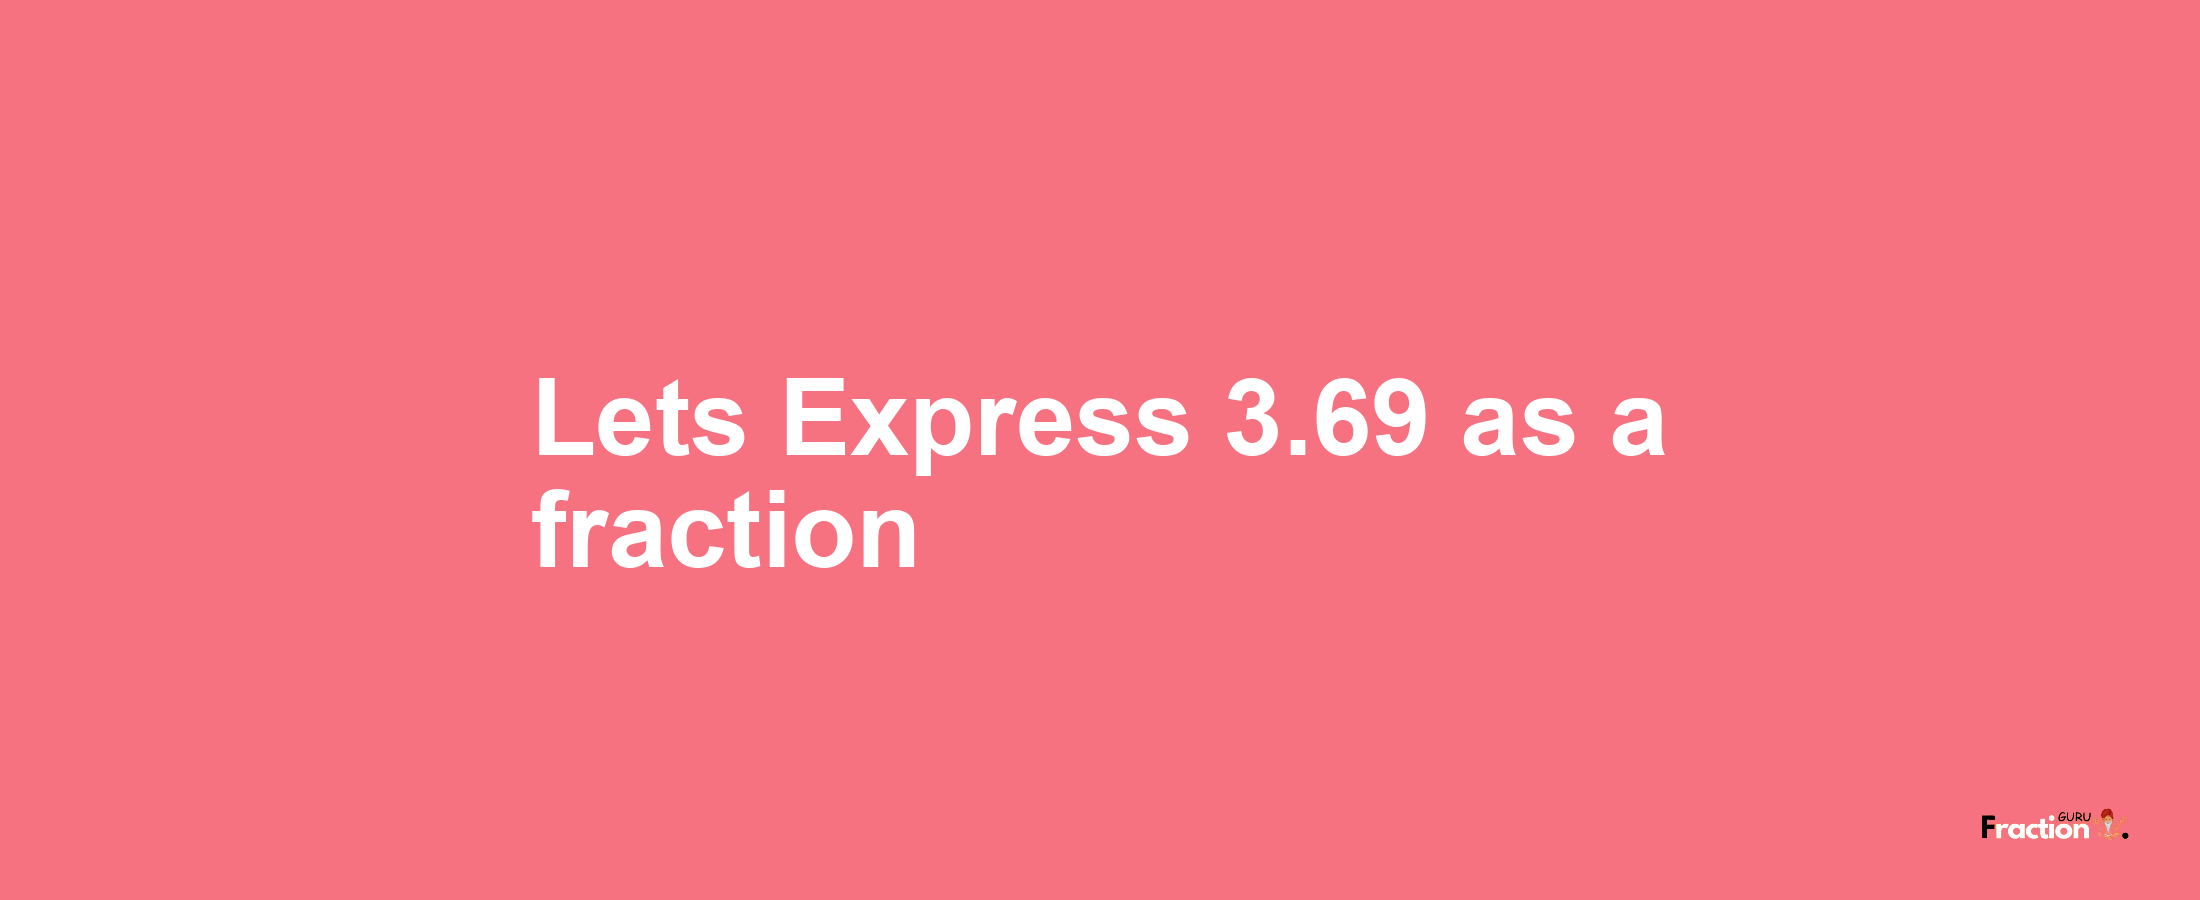 Lets Express 3.69 as afraction